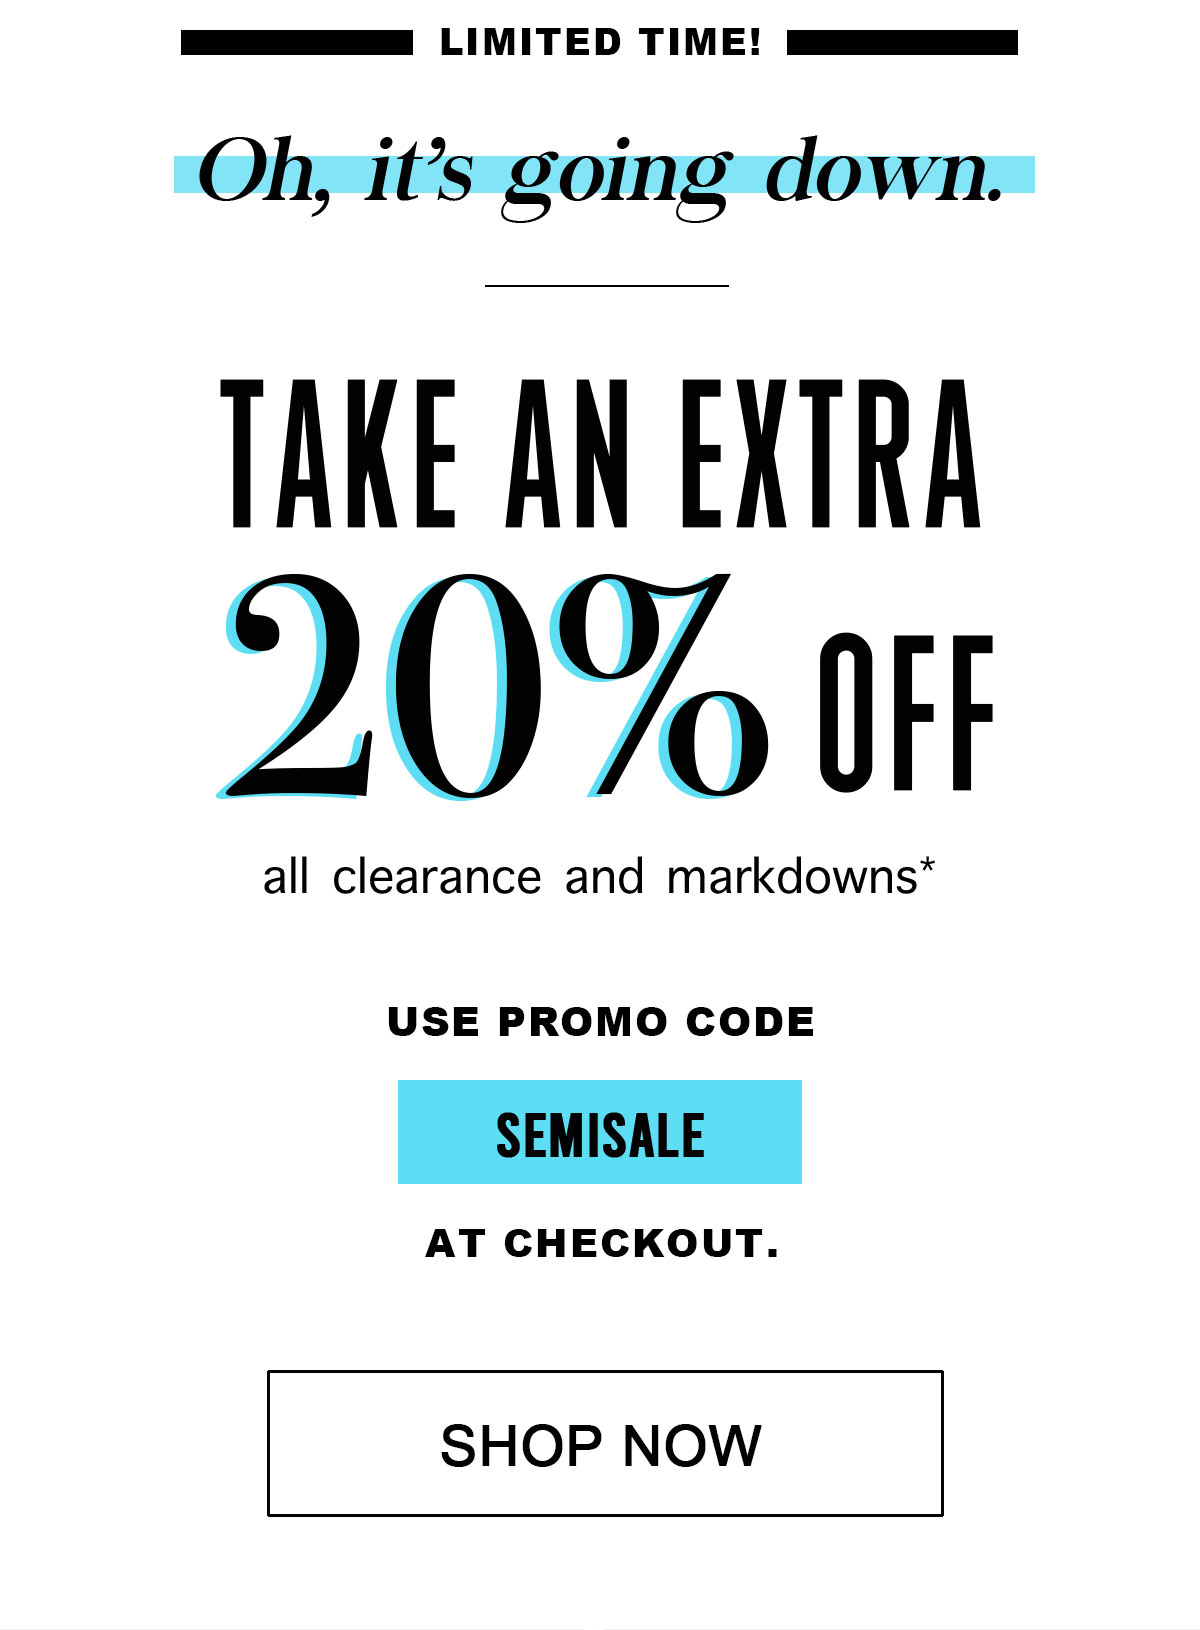 Limited time!   Oh, it's going down.   Take an Extra 20% Off all clearance and markdowns*  Use Promo Code  SEMISALE At Checkout.  Shop Now